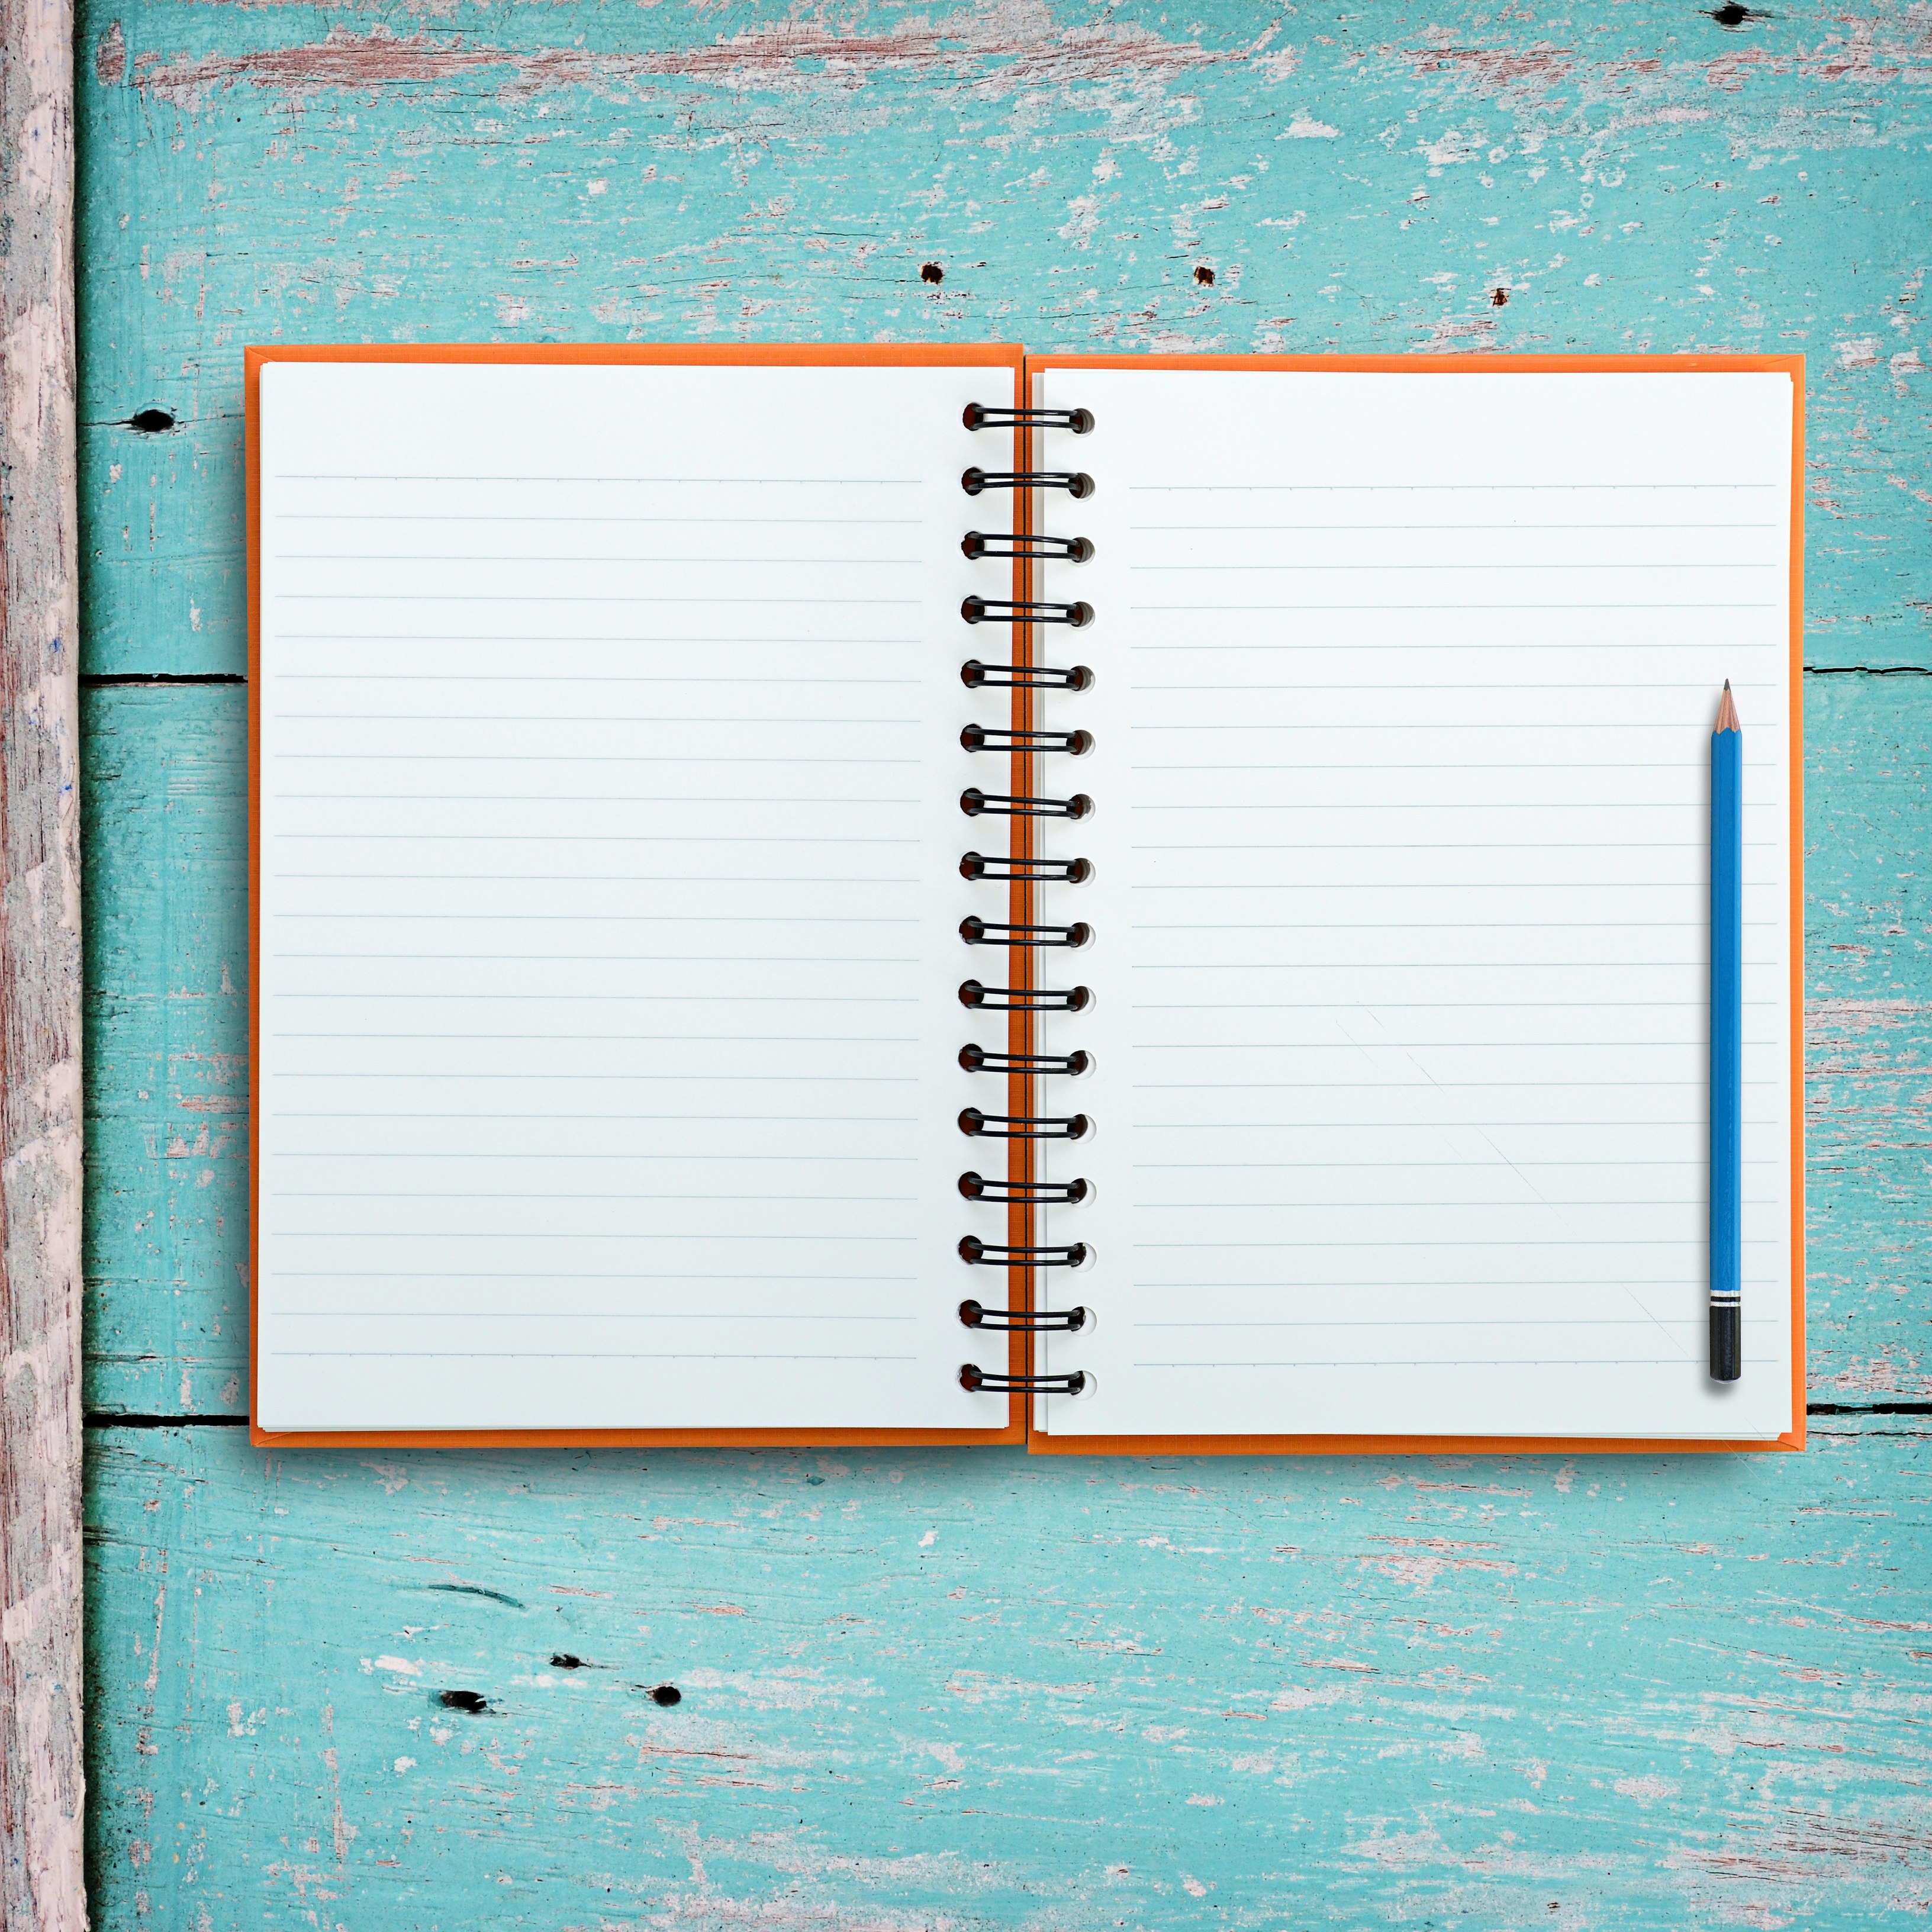 A blank notebook with a pencil on a wooden table